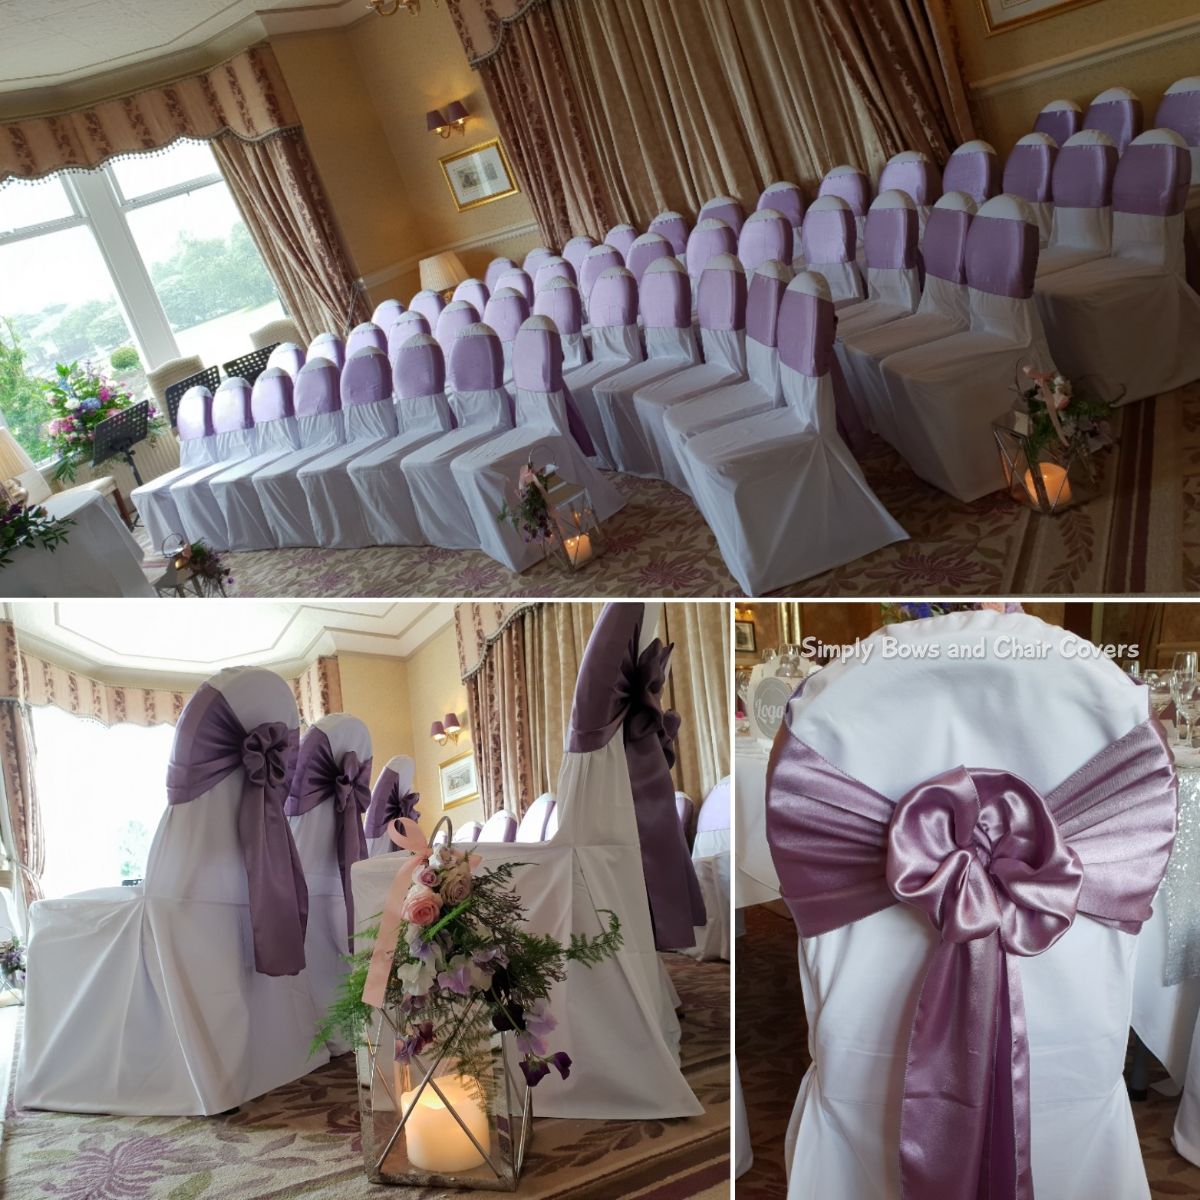 Simply Bows and Chair Covers Cumbria-Image-7